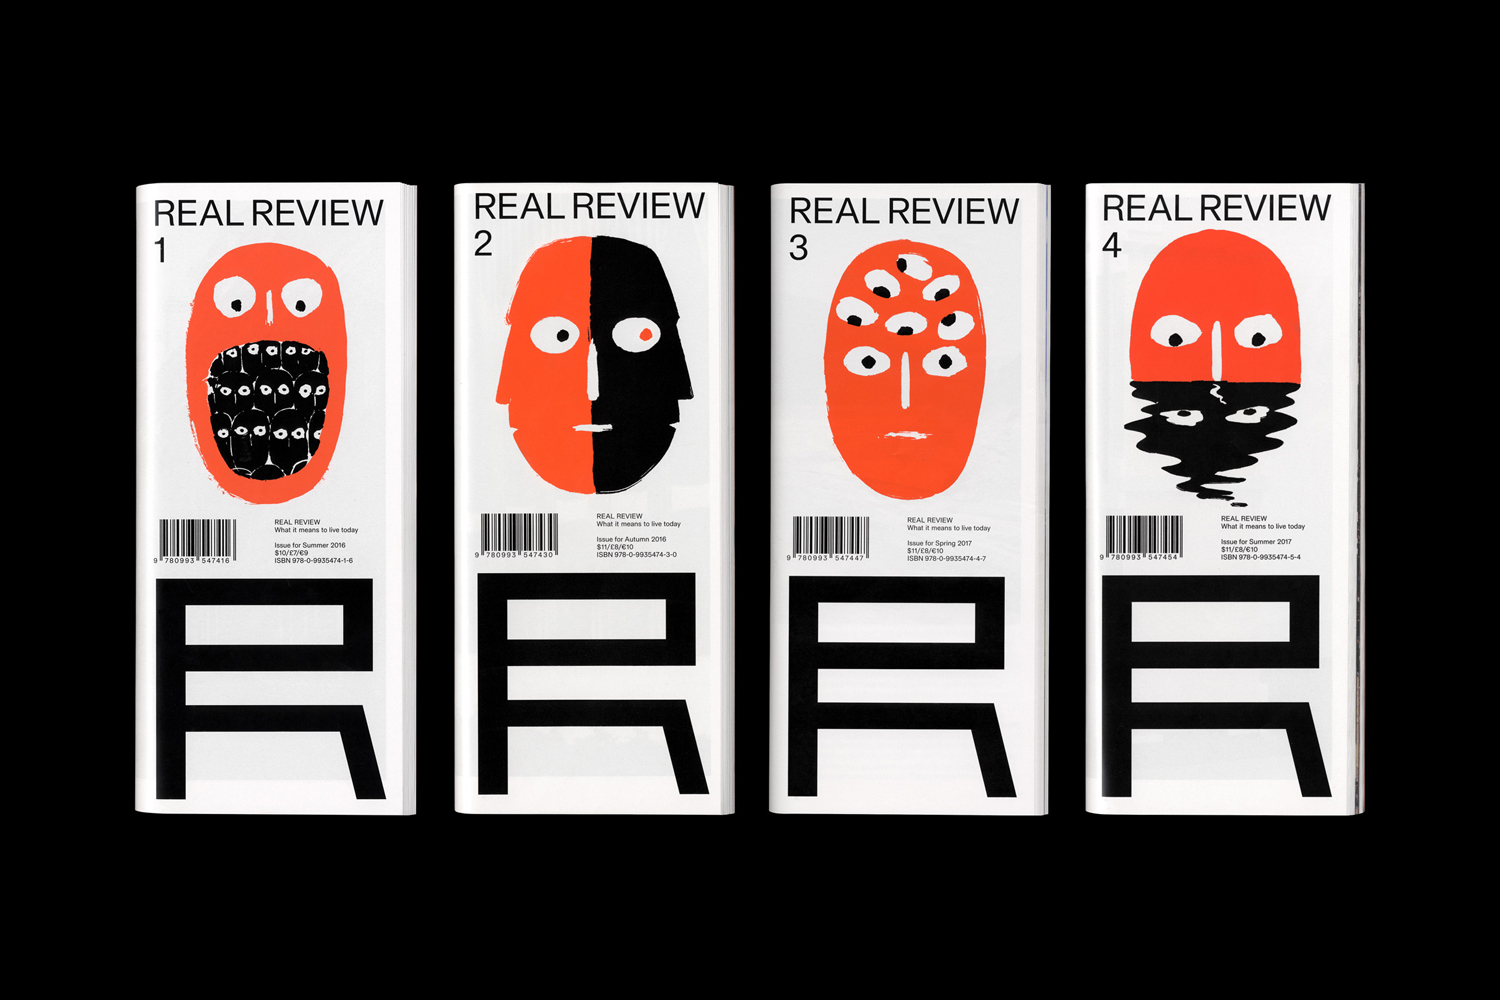 Magazine Design Inspiration – Real Review by OK-RM